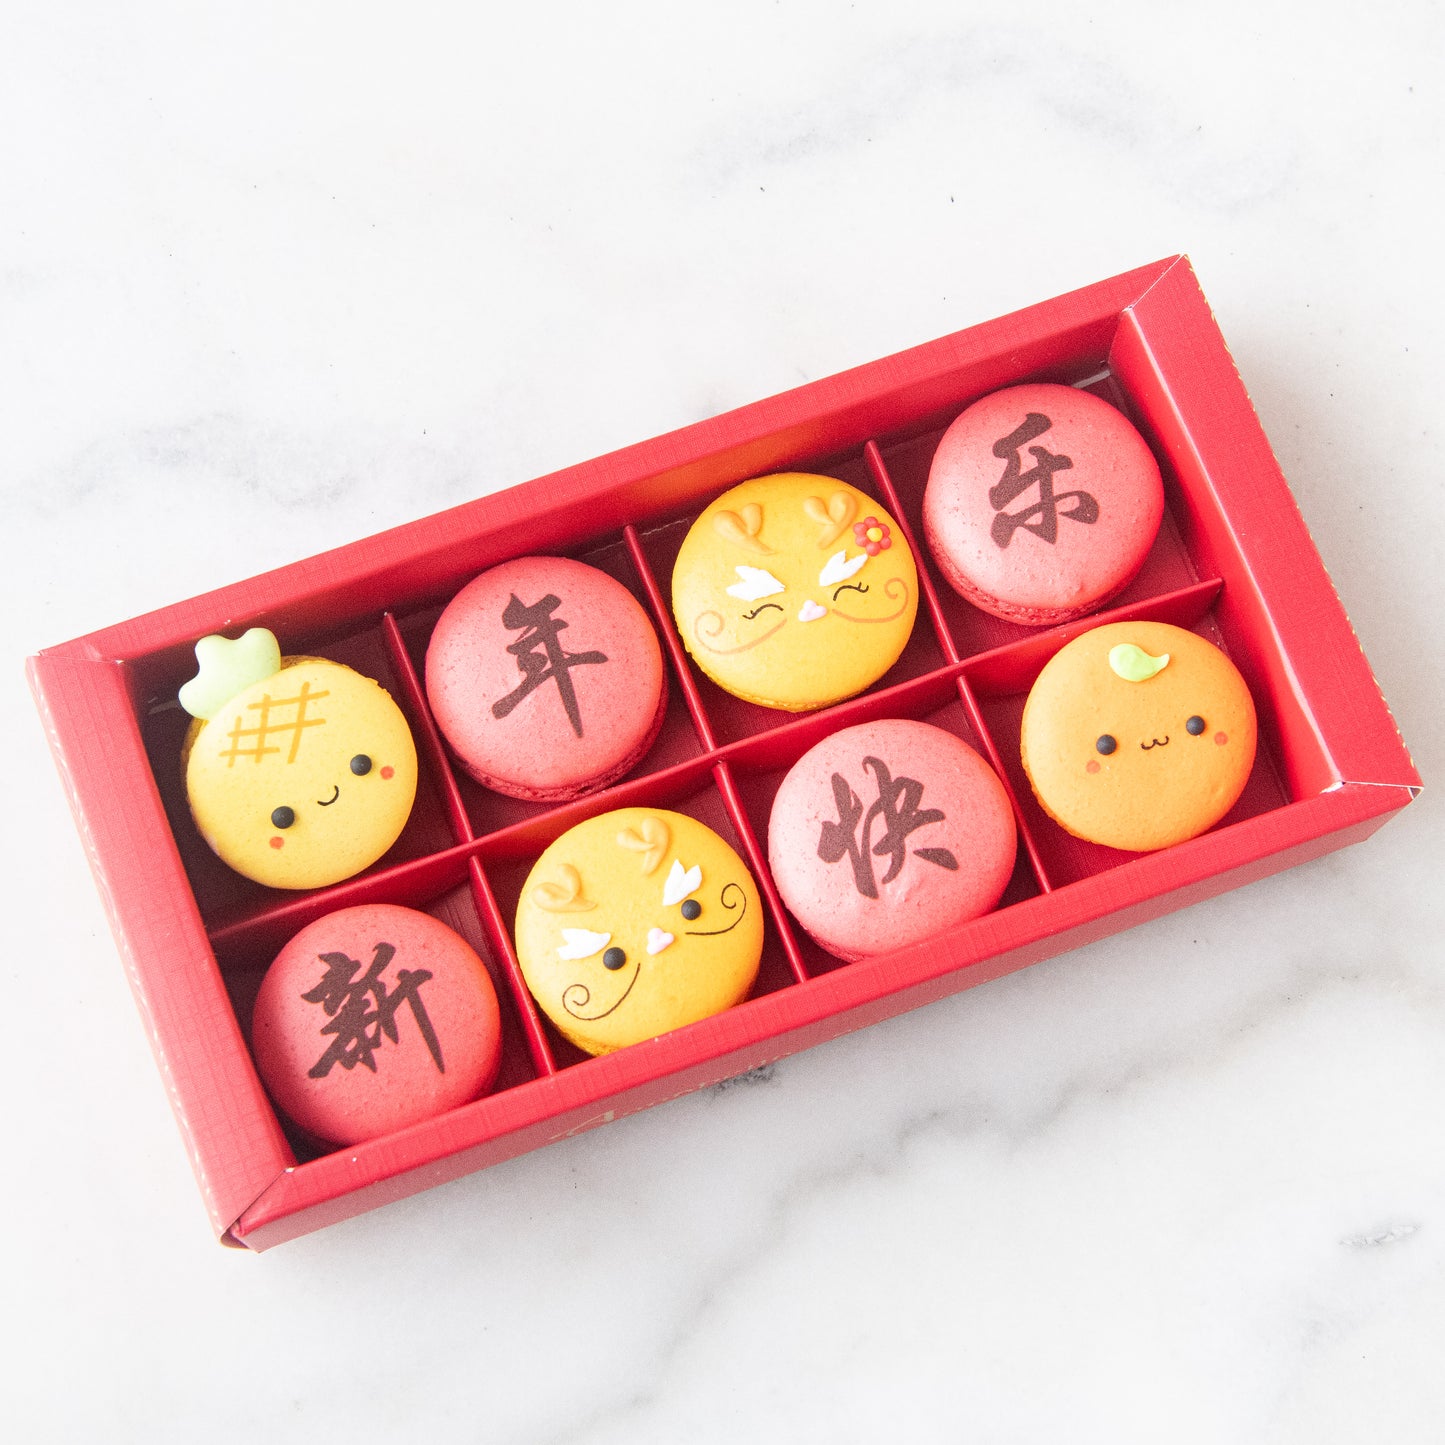 Year Of The Dragon! | 8in1 New Year Gems in Gift Box | $29.80 Nett